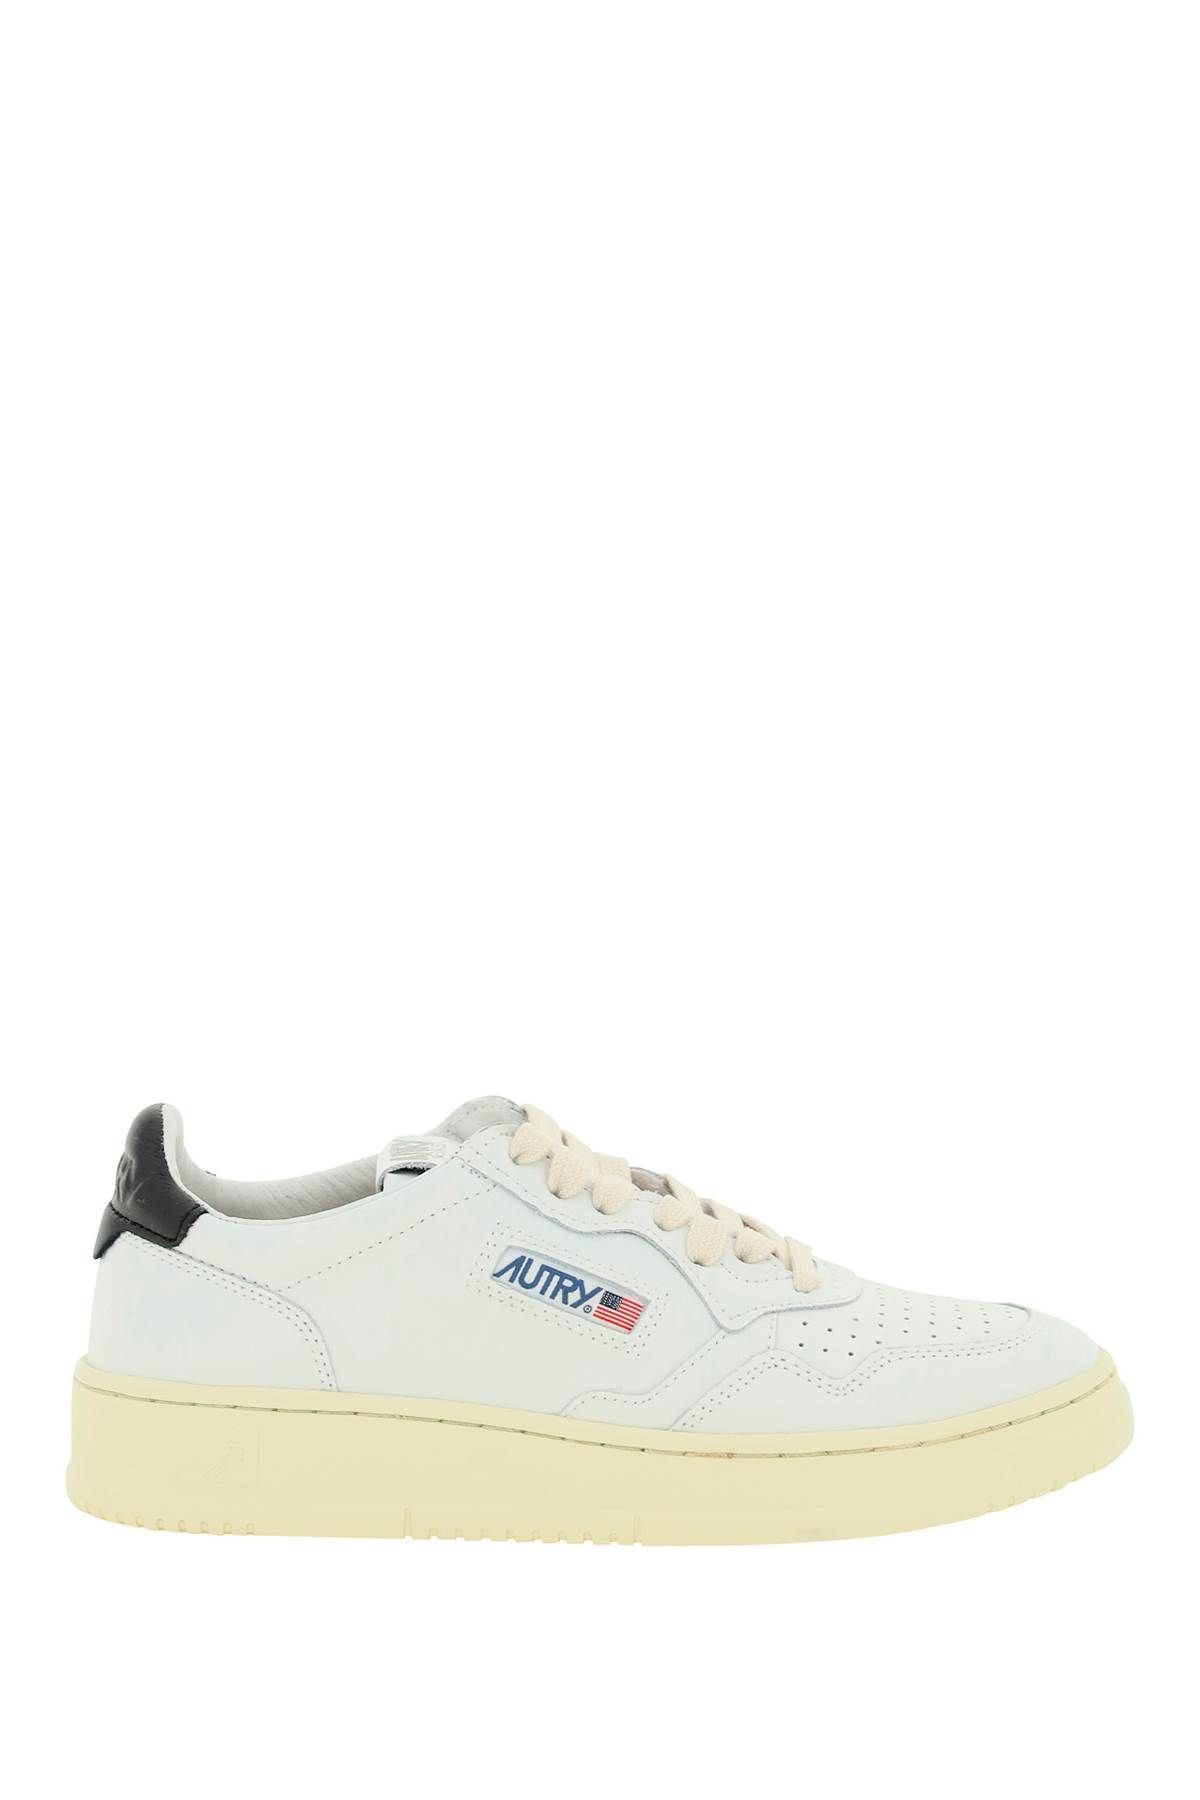 AUTRY AUTRY 'medalist' low sneakers